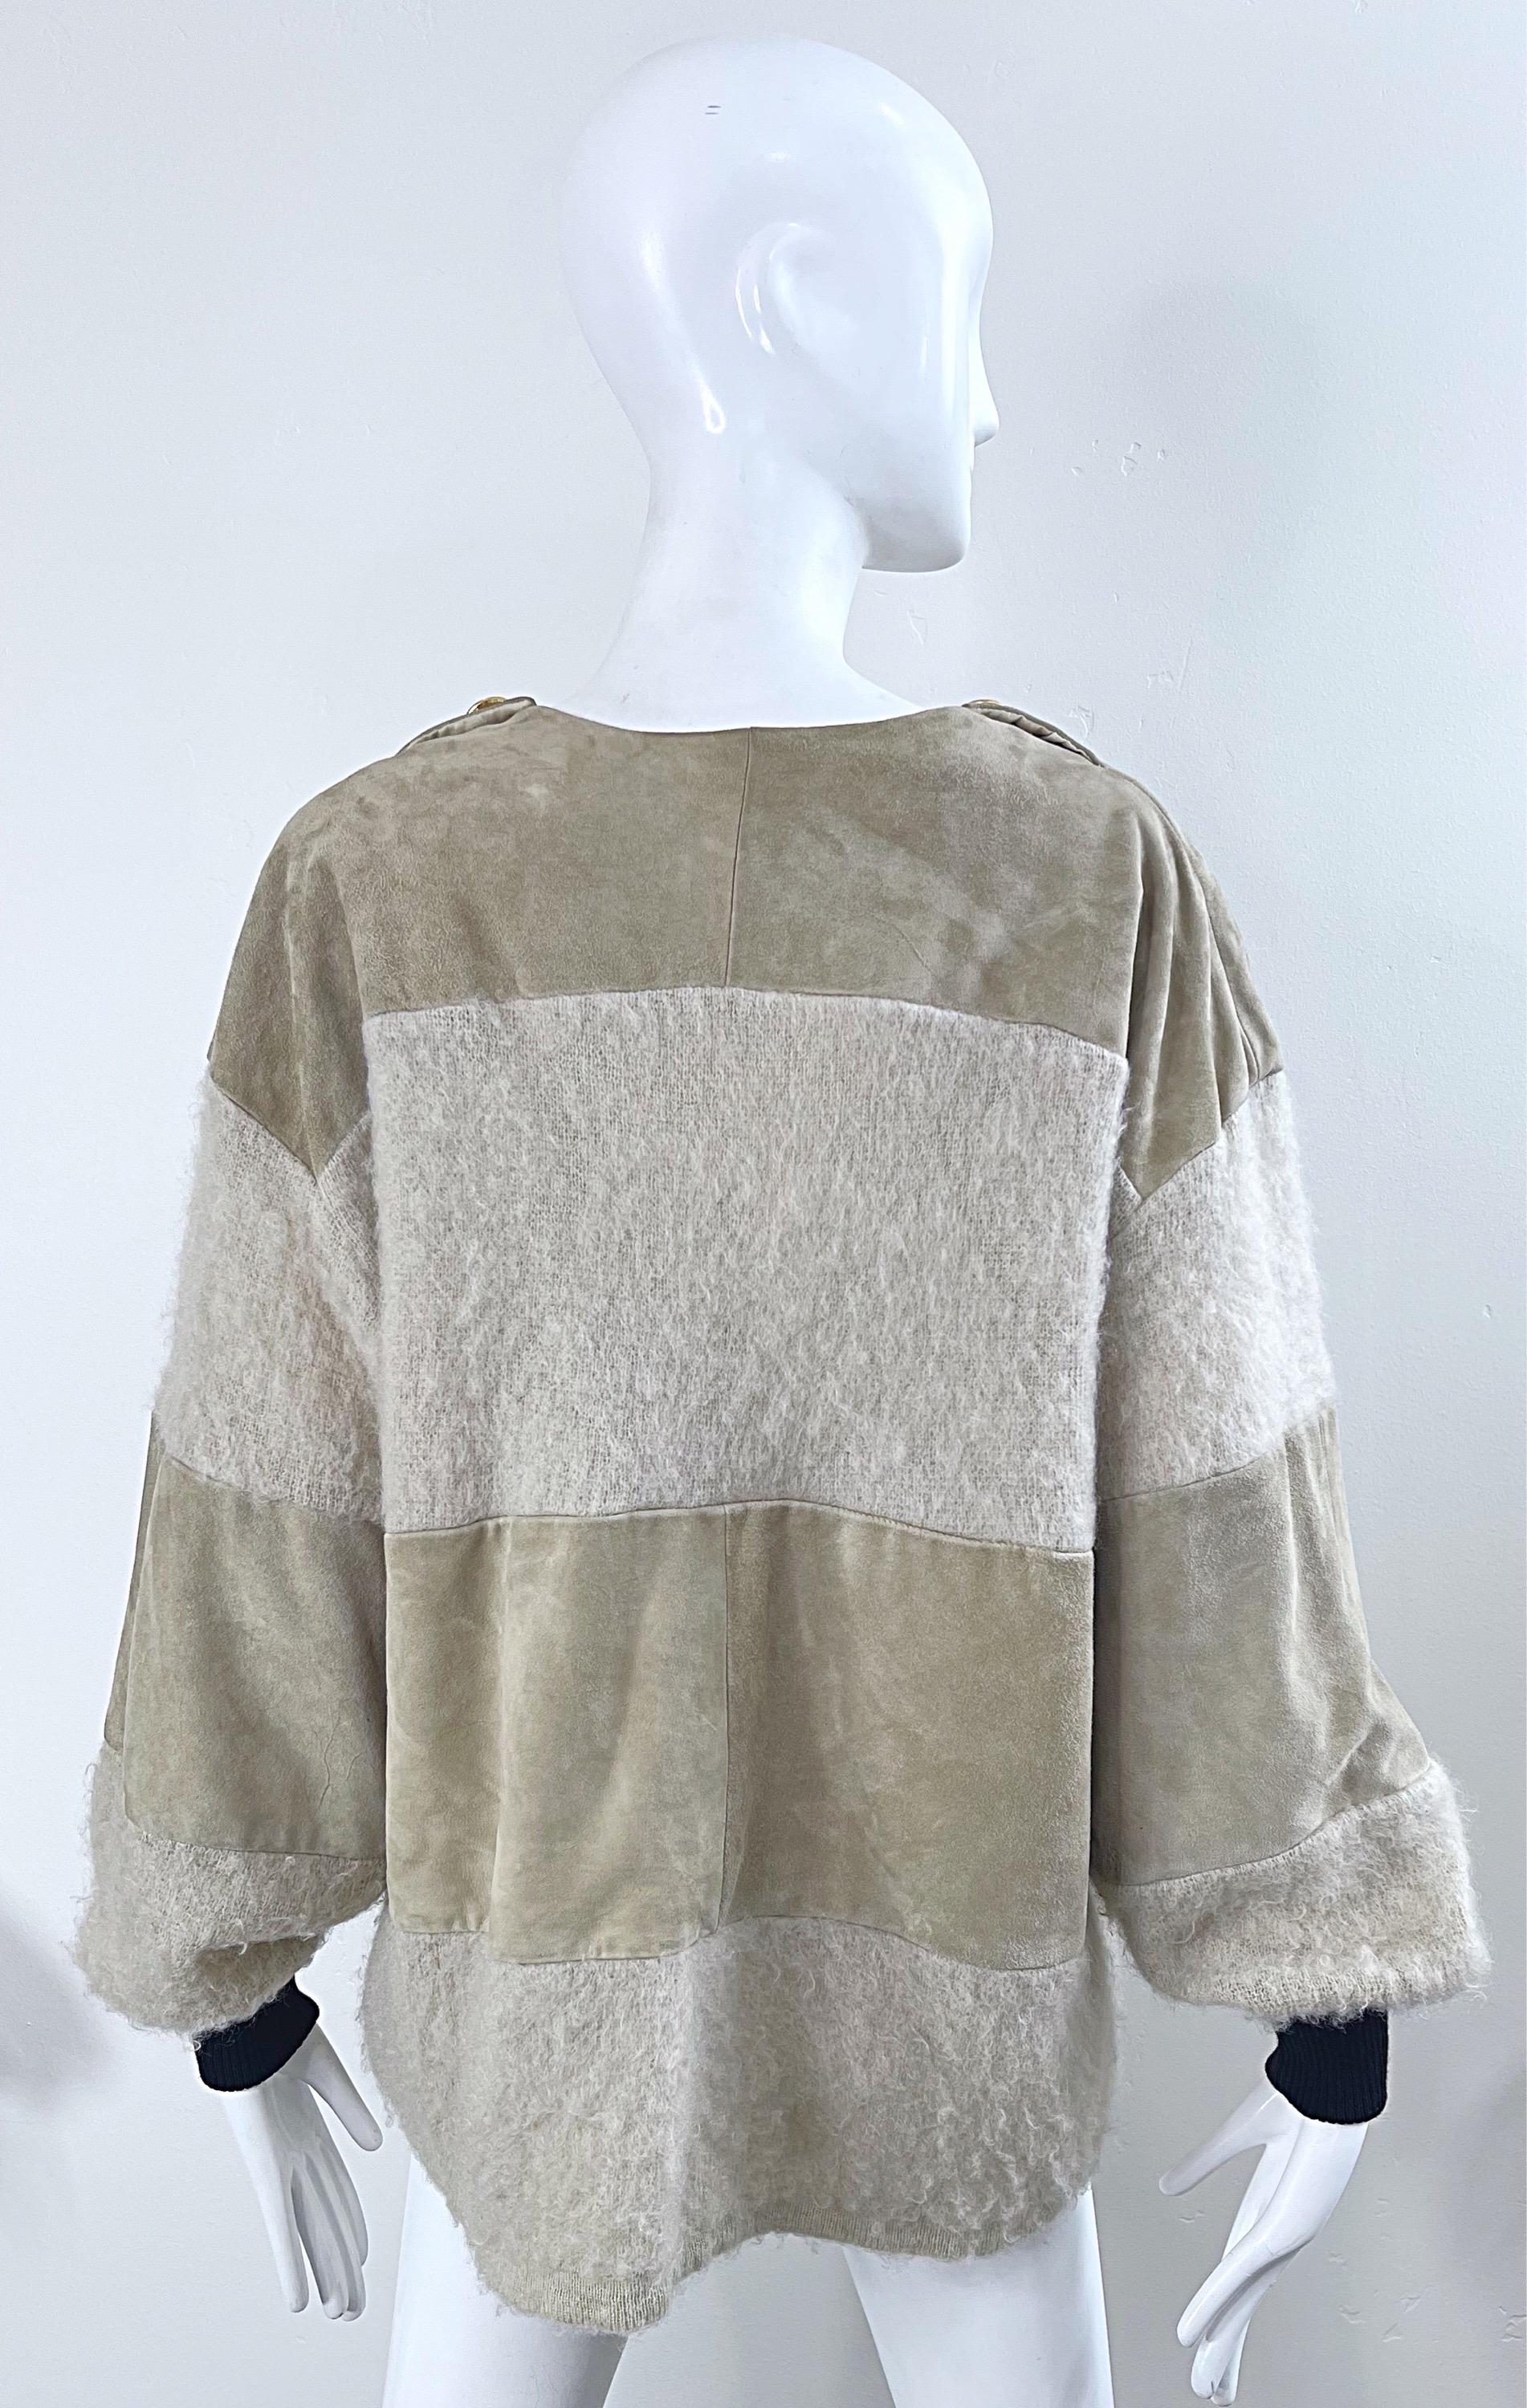 Gianfranco Ferre 1990s Leather Suede + Mohair Tan Nude Vintage 90s Sweater Top For Sale 7